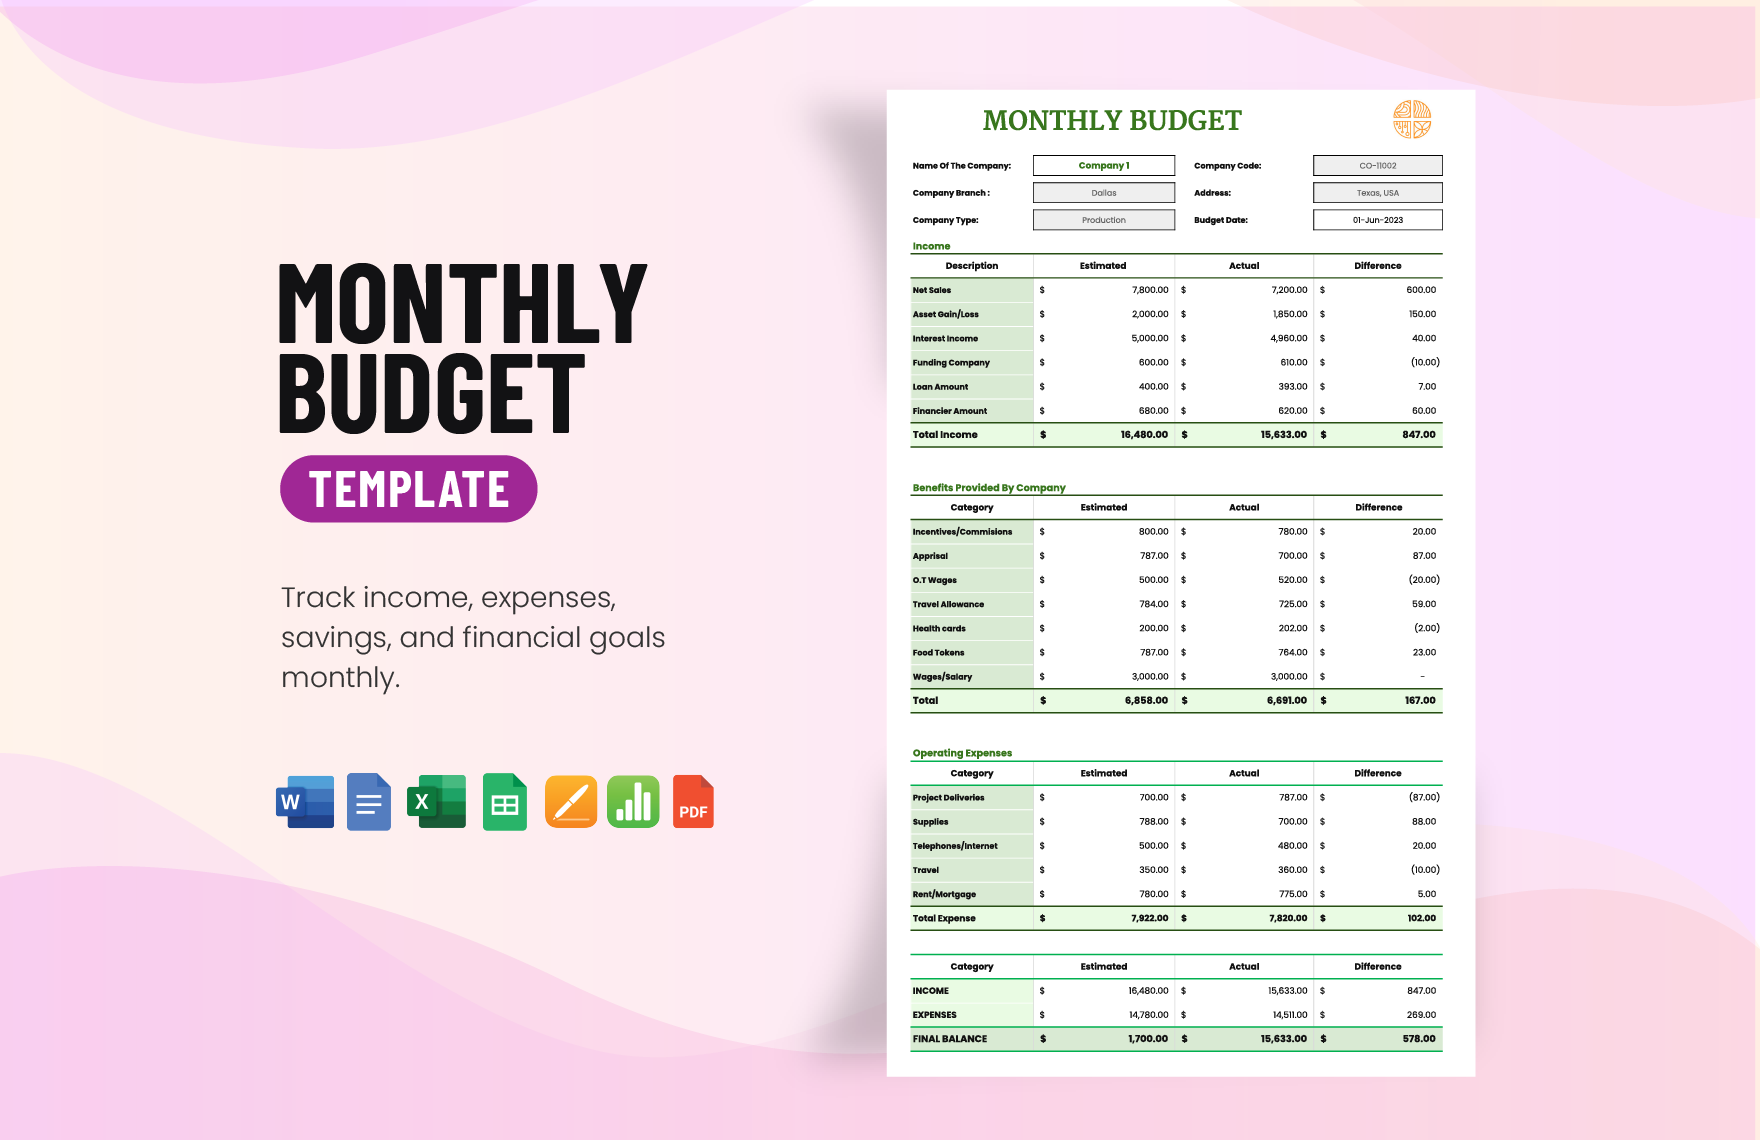 Monthly Budget Template in Word, Google Docs, Excel, PDF, Google Sheets, Apple Pages, Apple Numbers